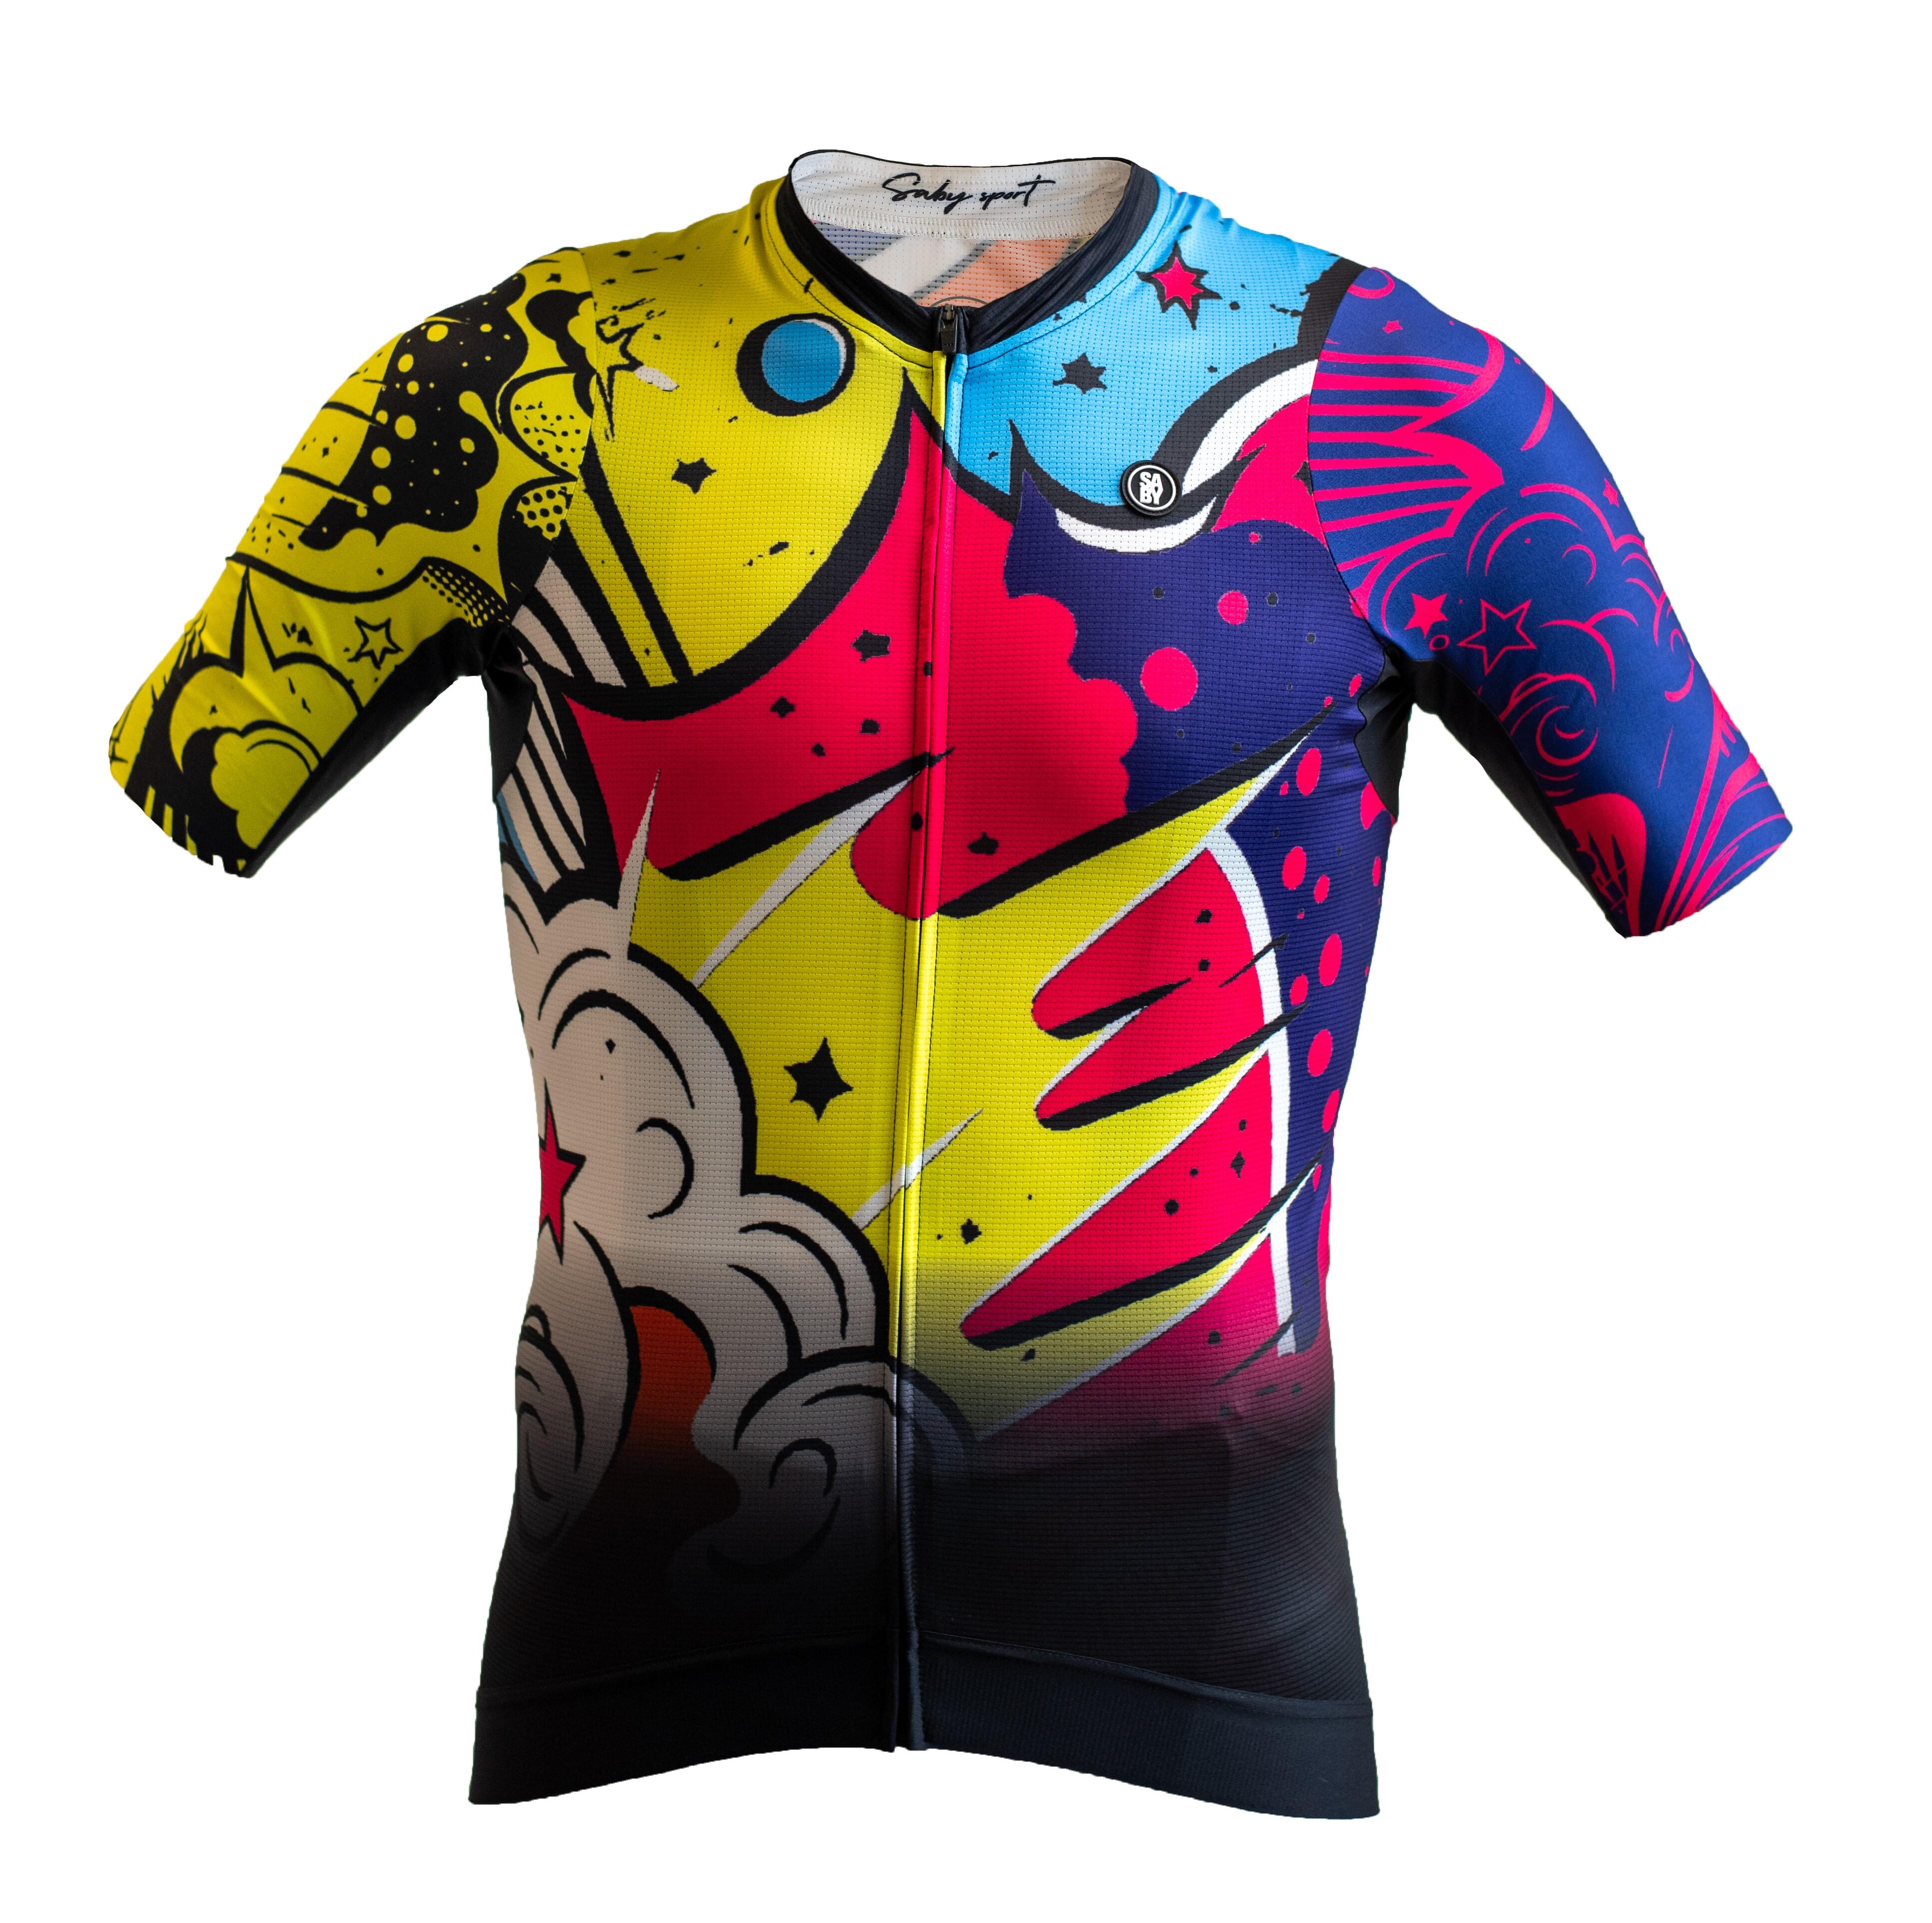 Maglia Limited Edition Ops 2.0